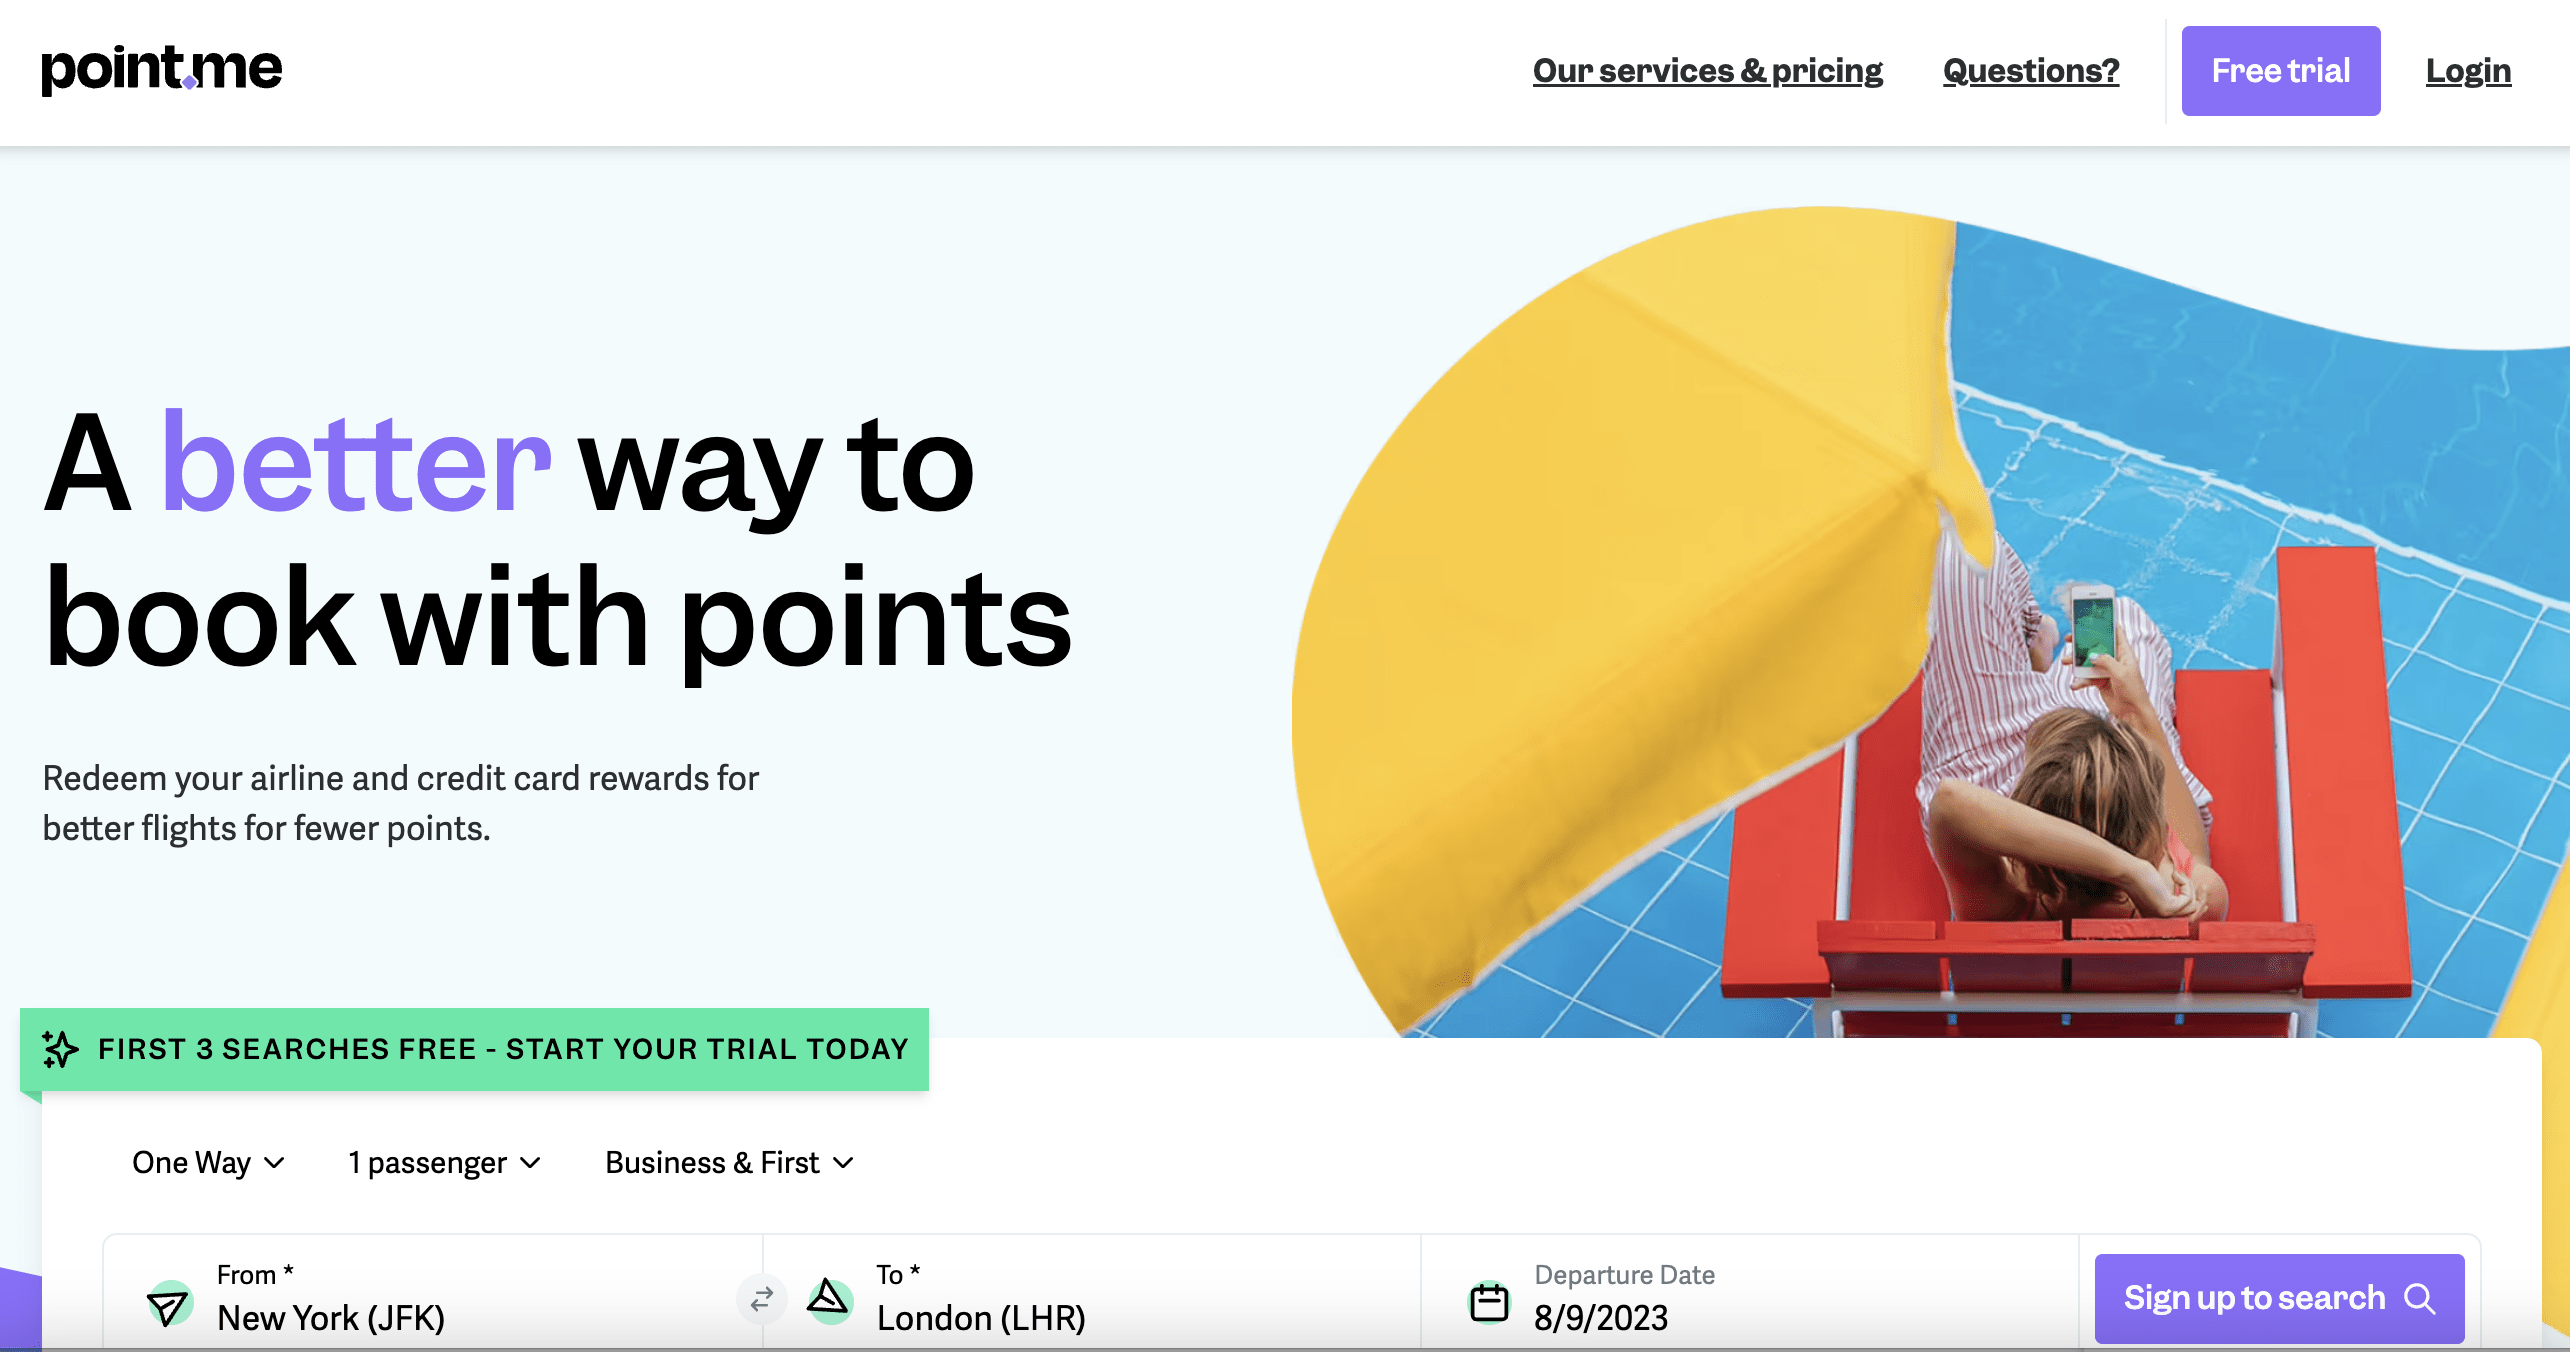 point.me credit card points and miles award flight